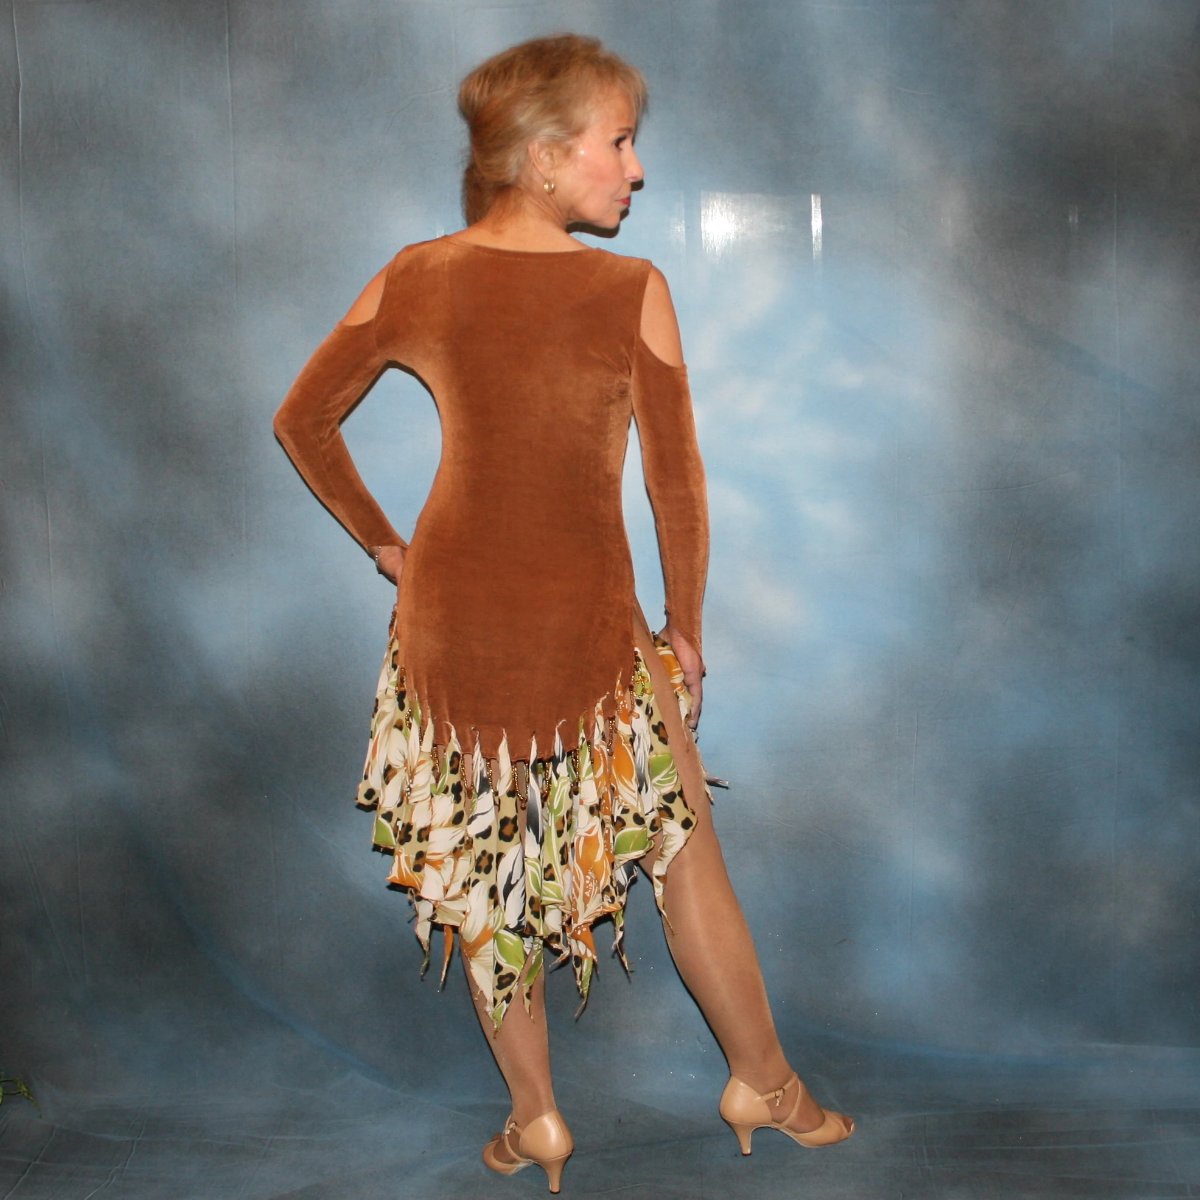 Crystal's Creations back view of Latin/rhythm dance dress of luxurious cinnamon/ginger colored solid slinky with flounces of tropical/leopard print, enhanced with hand beading through out the flounces is a converta-ballroom dress